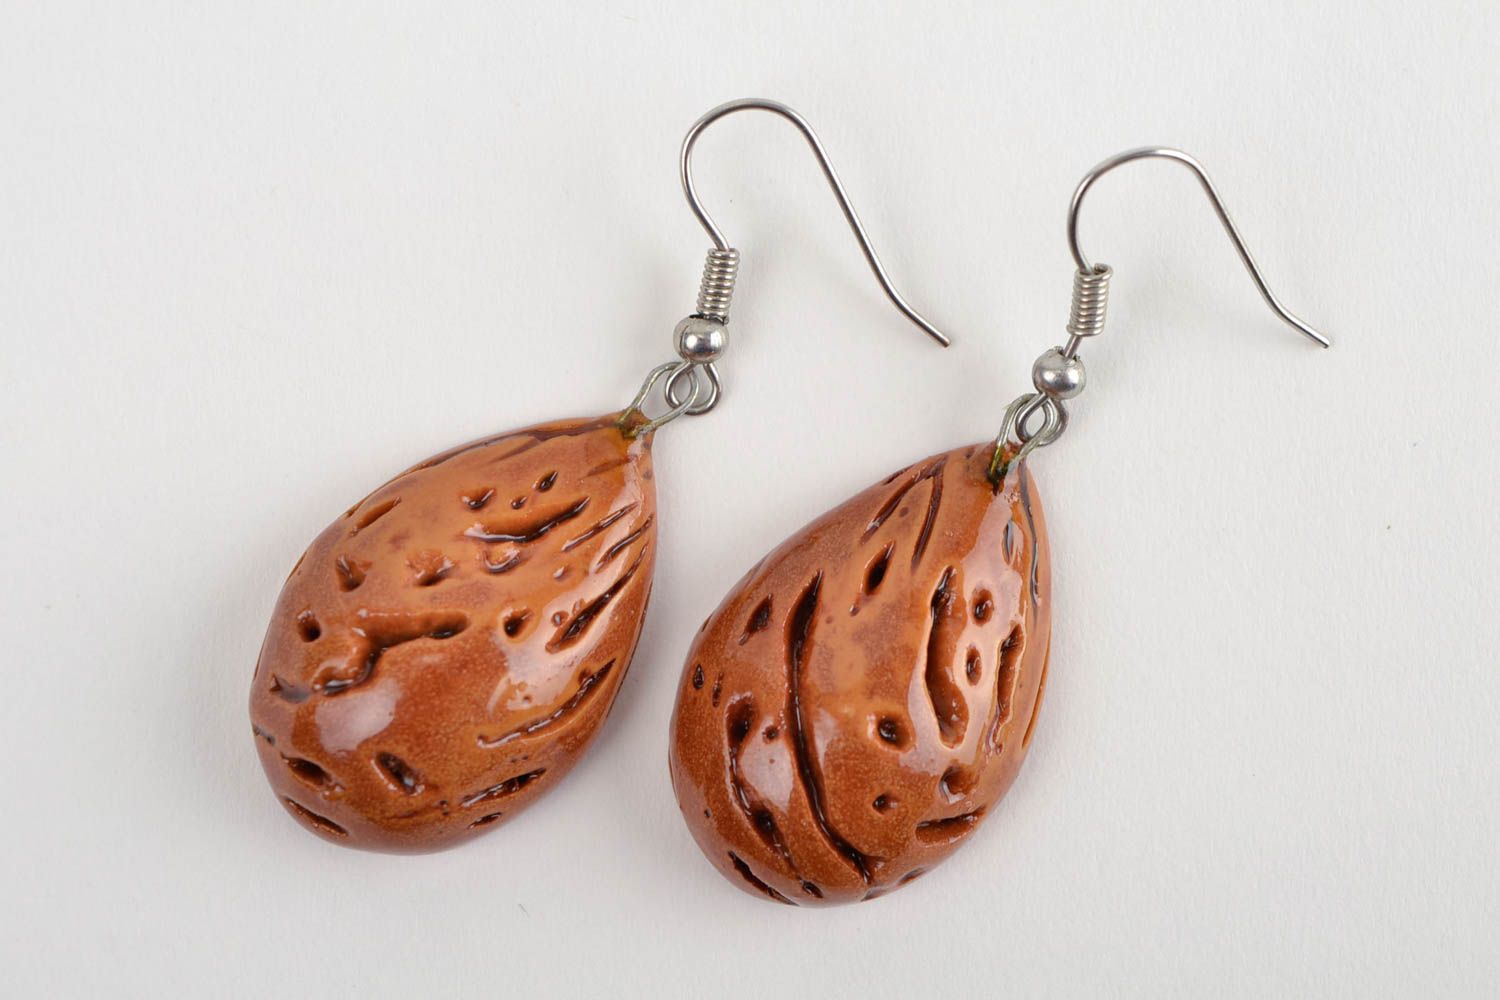 Homemade jewelry designer earrings wooden earrings fashion accessories photo 2